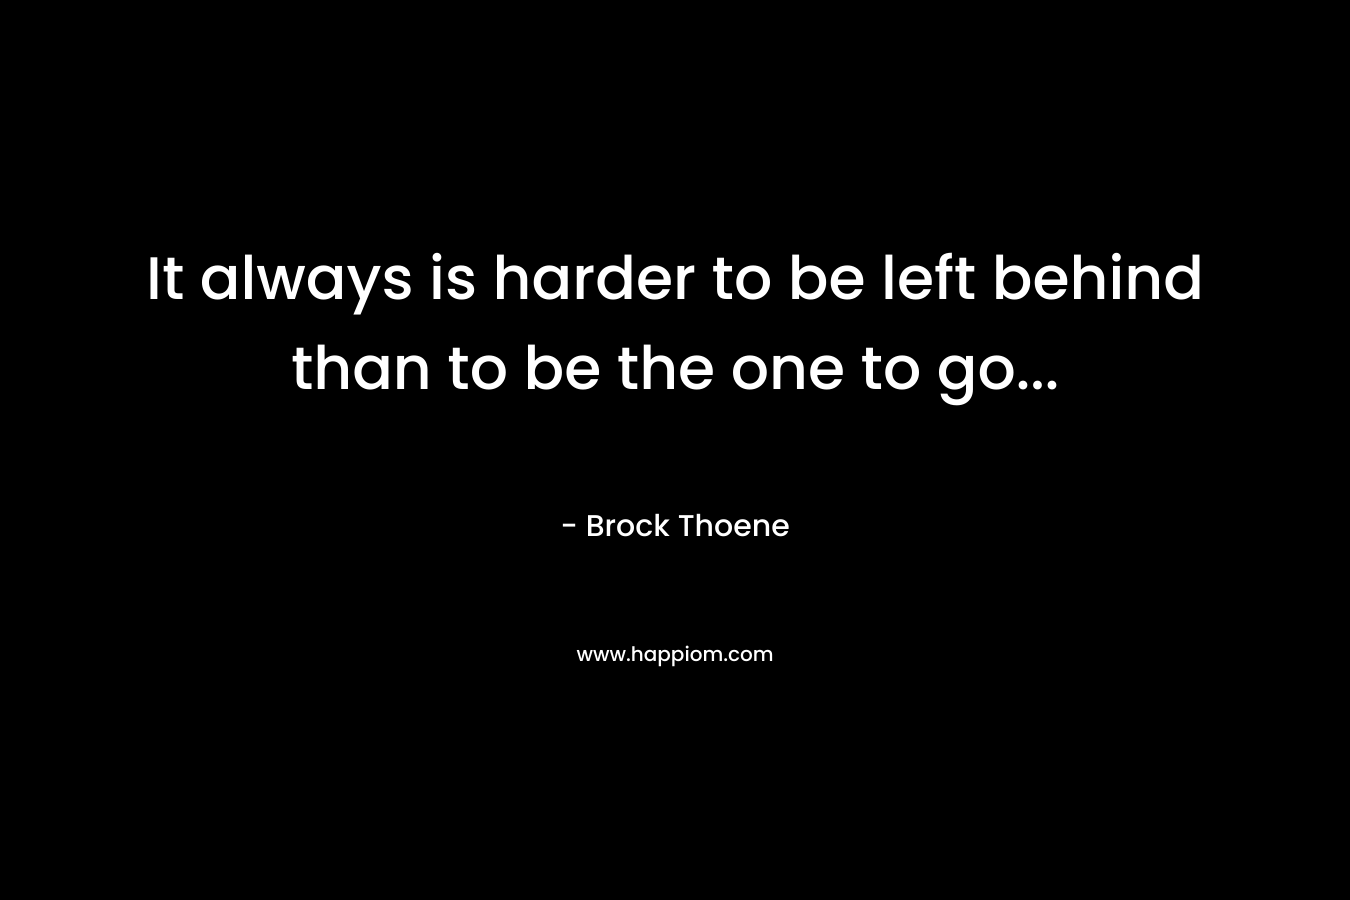 It always is harder to be left behind than to be the one to go...